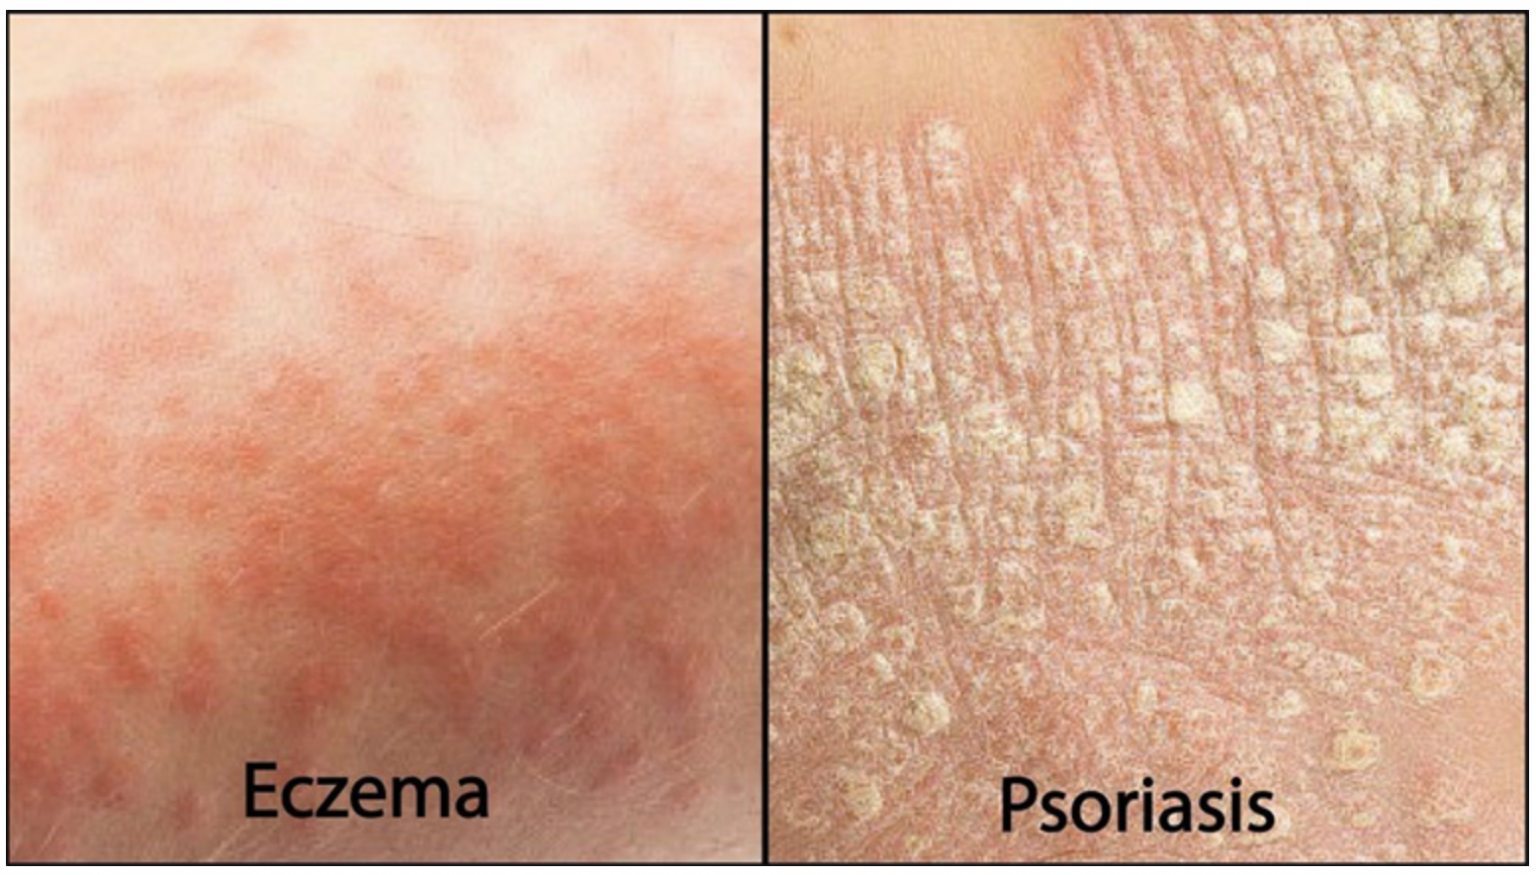 Psoriasis and Eczema: What